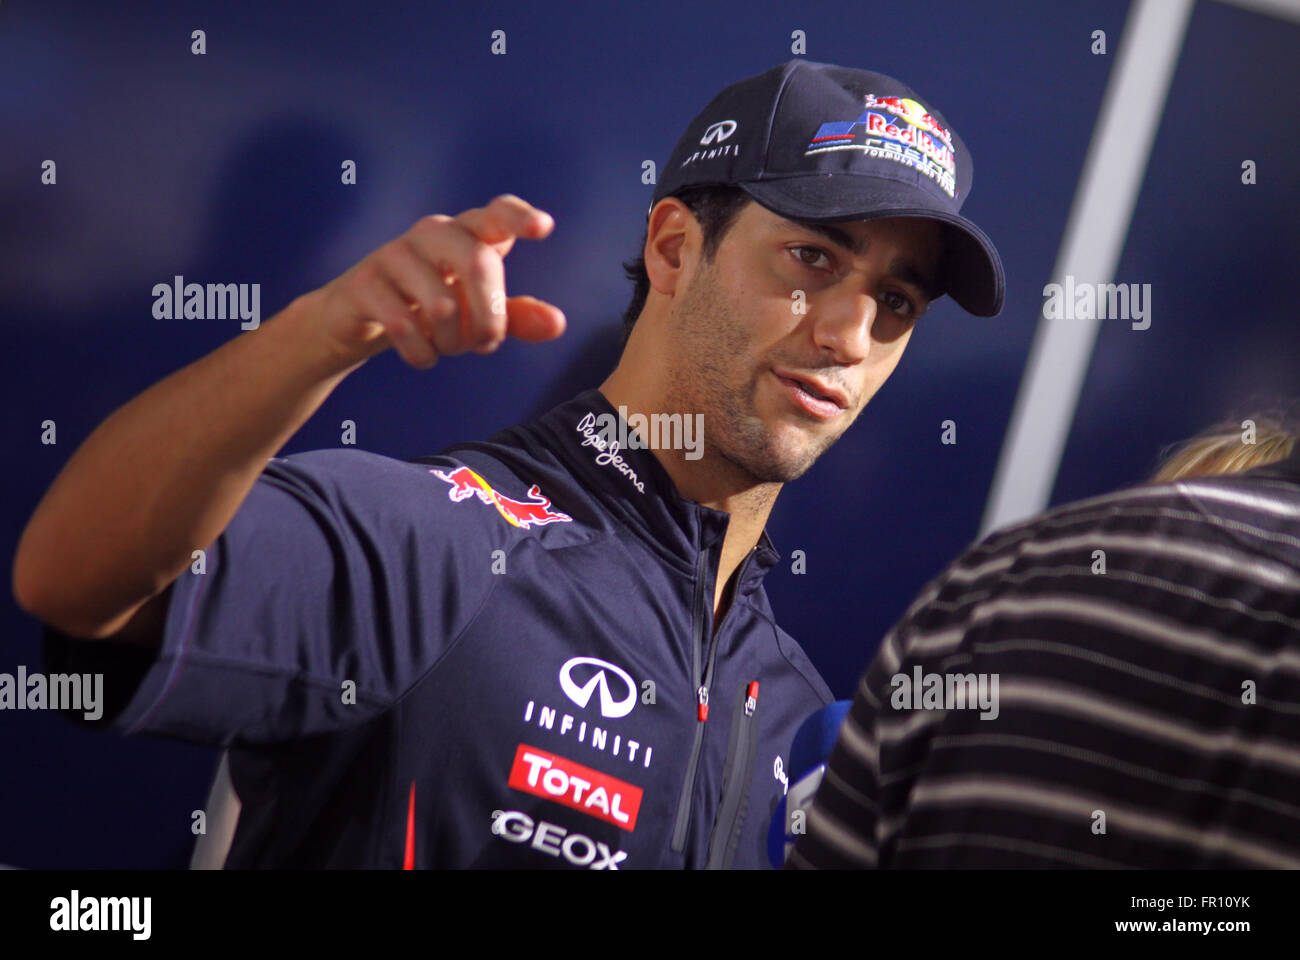 KYIV, UKRAINE - MAY 19, 2012: Driver Daniel Ricciardo of Red Bull Racing Team looks on during Red Bull Champions Parade on the streets of Kyiv city Stock Photo